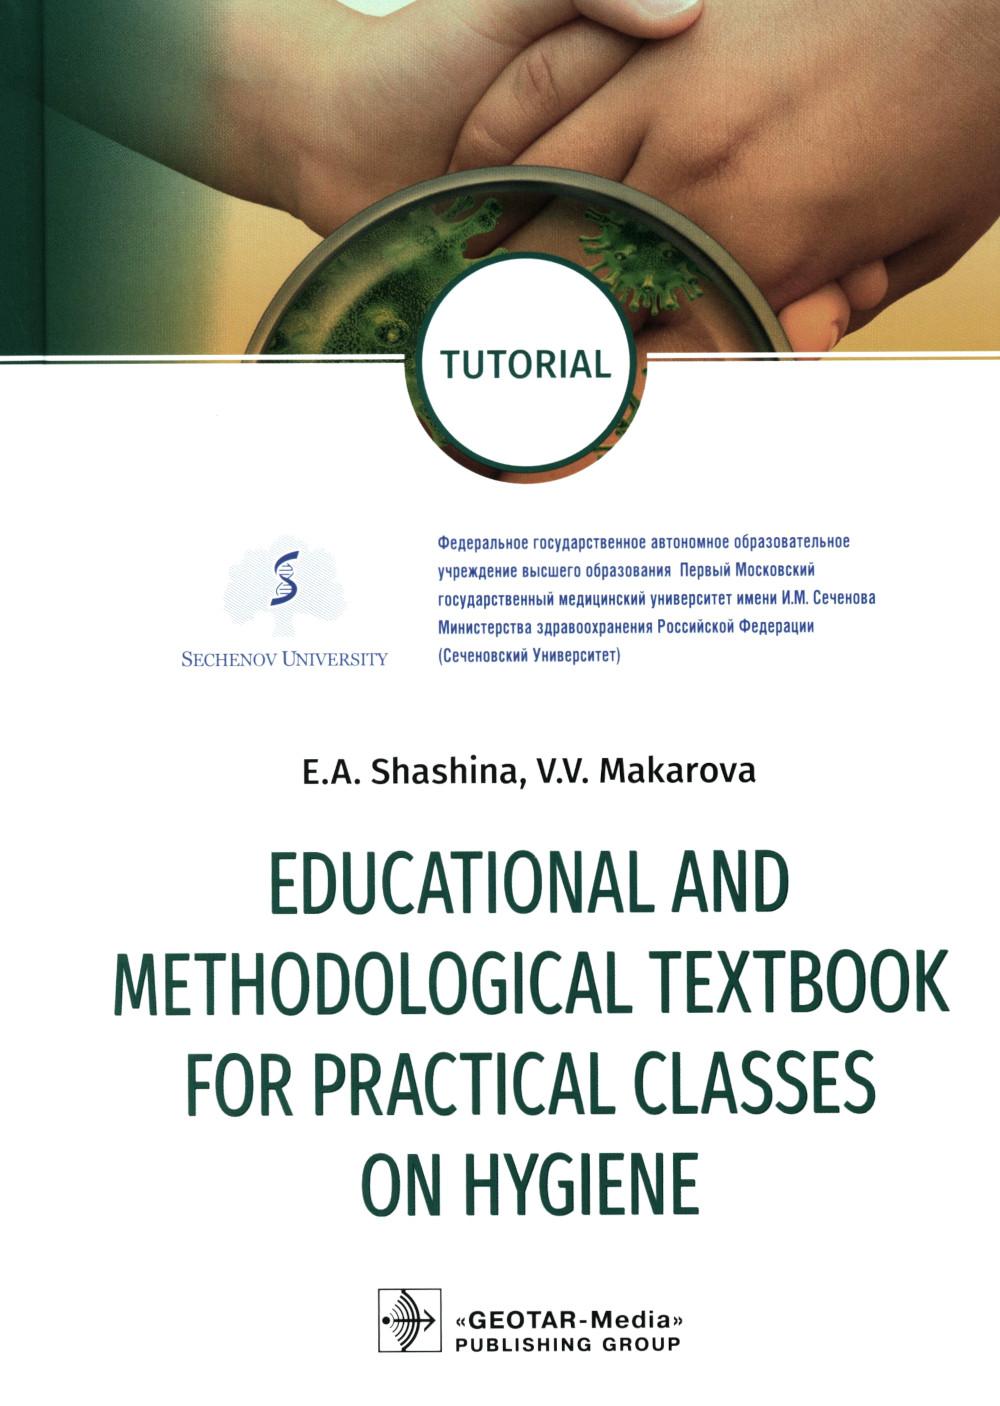 Educational and methodological textbook for practical classes on hygiene: tutorial (   31.05.01  , 33.05.01 , 31.05.03 )